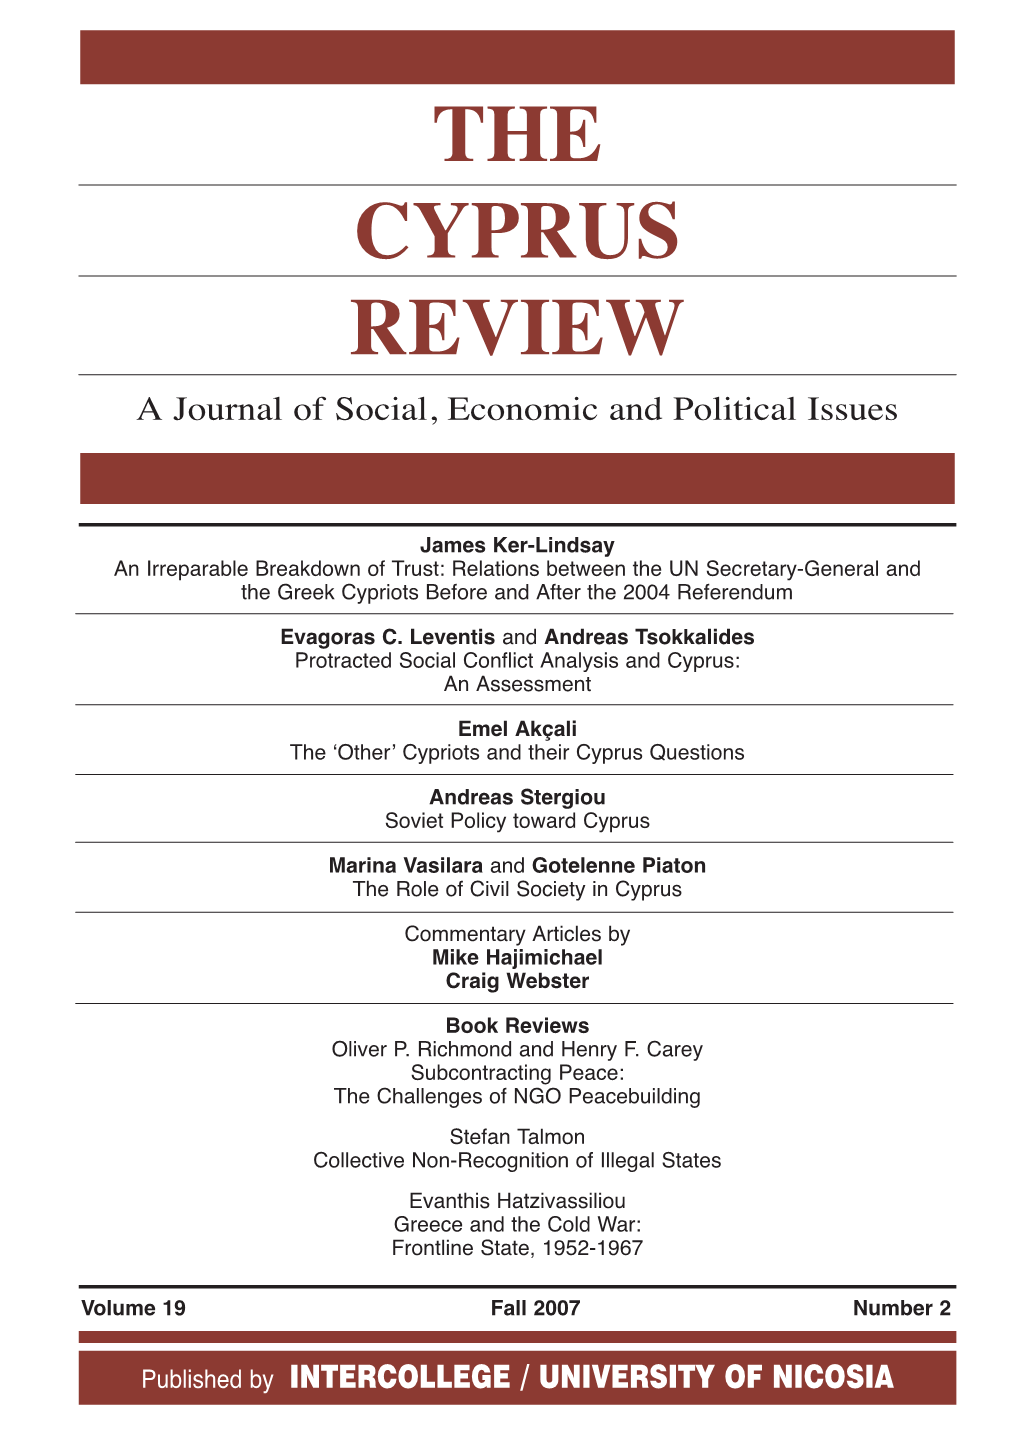 THE CYPRUS REVIEW a Journal of Social, Economic and Political Issues